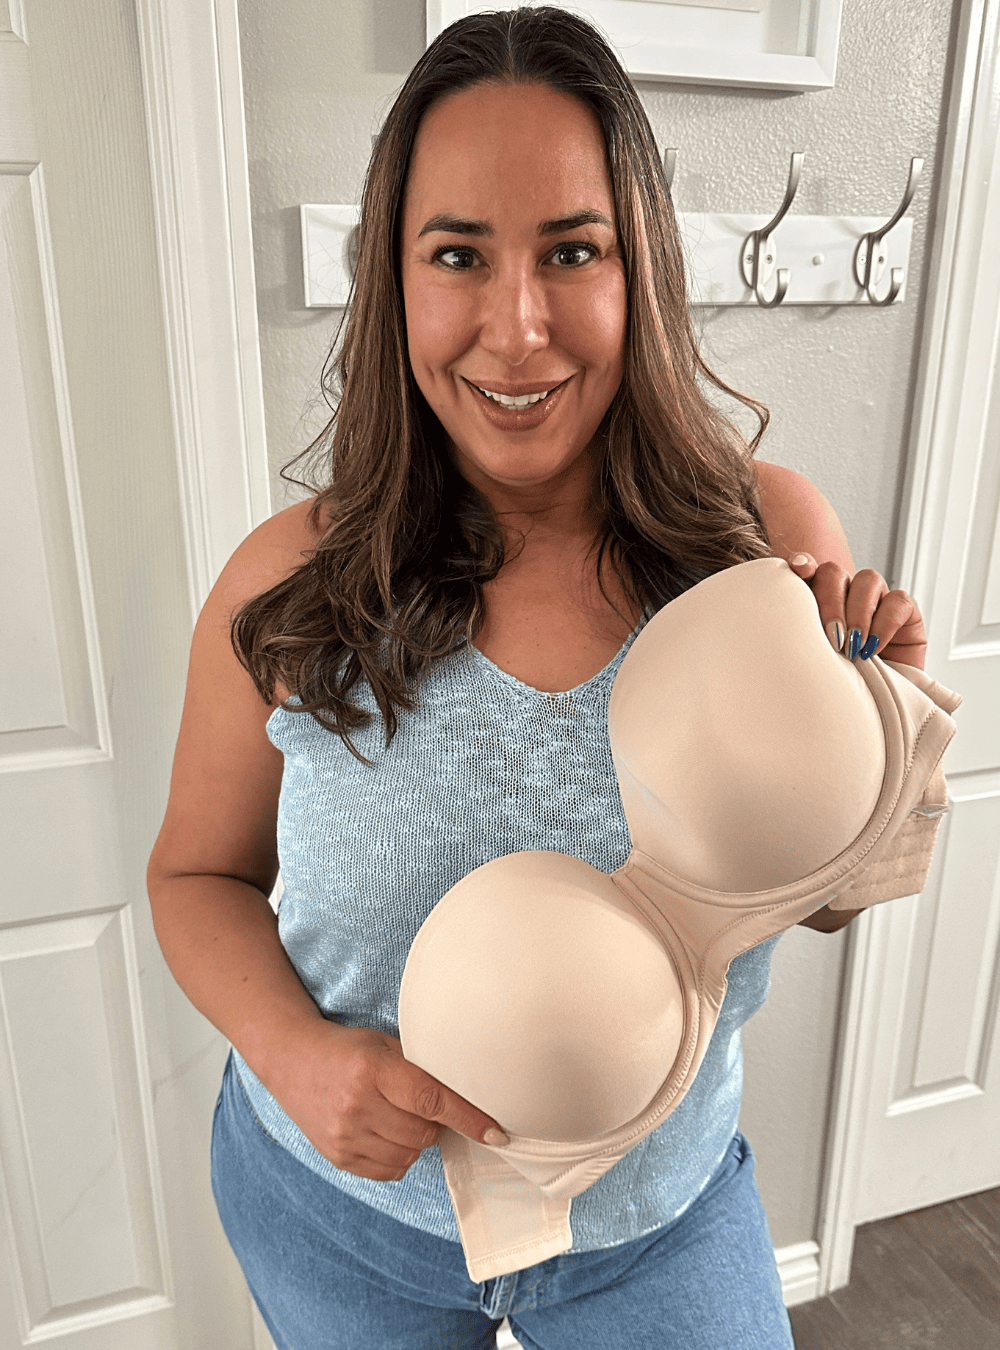 Strapless Bra with the BEST SUPPORT for Big Boobs! - Erica Marie